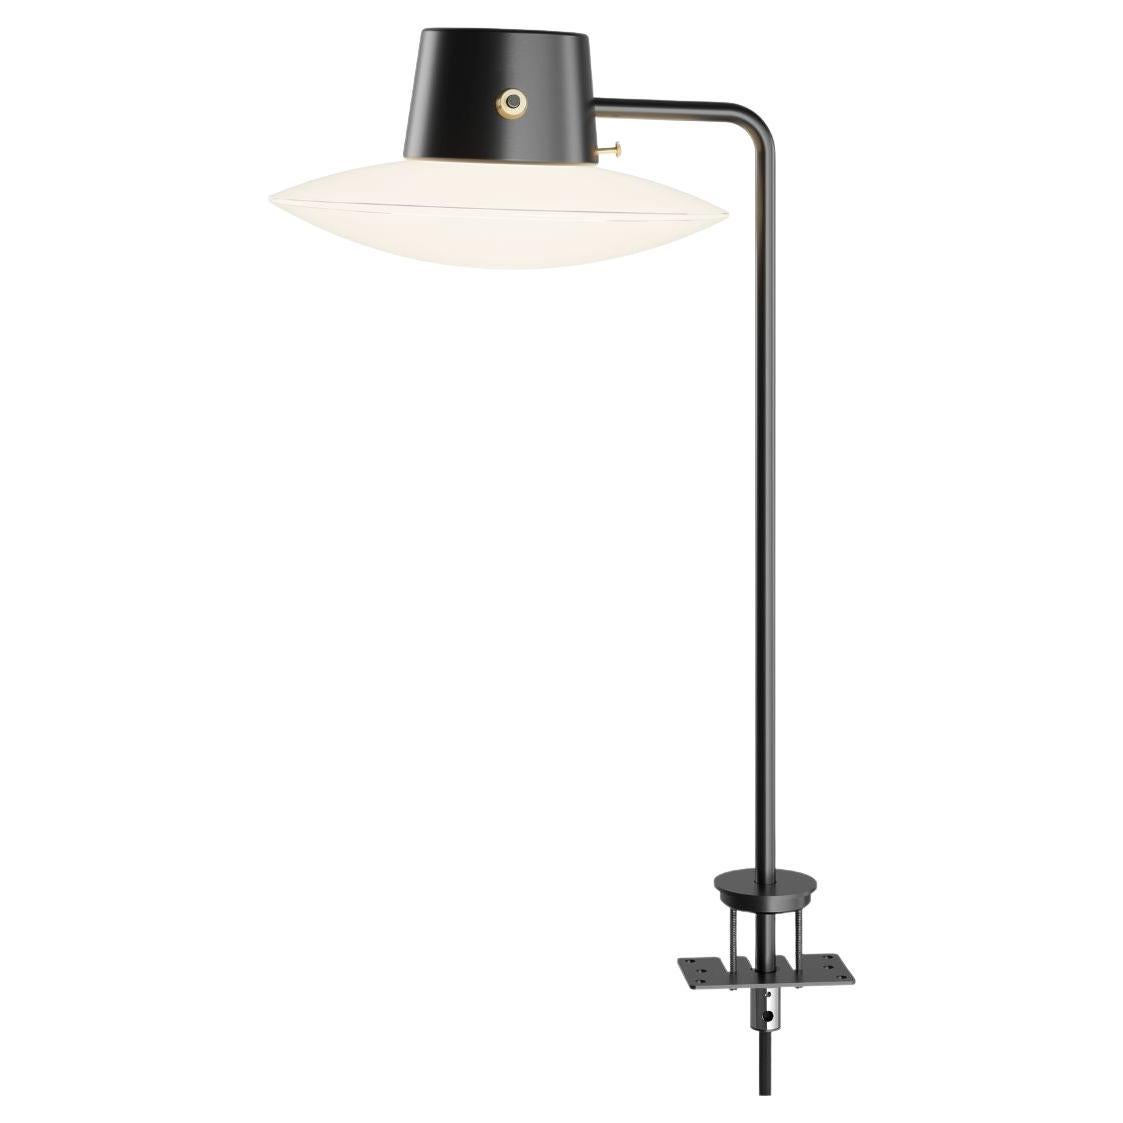 Arne Jacobsen 'AJ Oxford' Pin Mounted Table Lamp in Opal Glass for Louis Poulsen For Sale